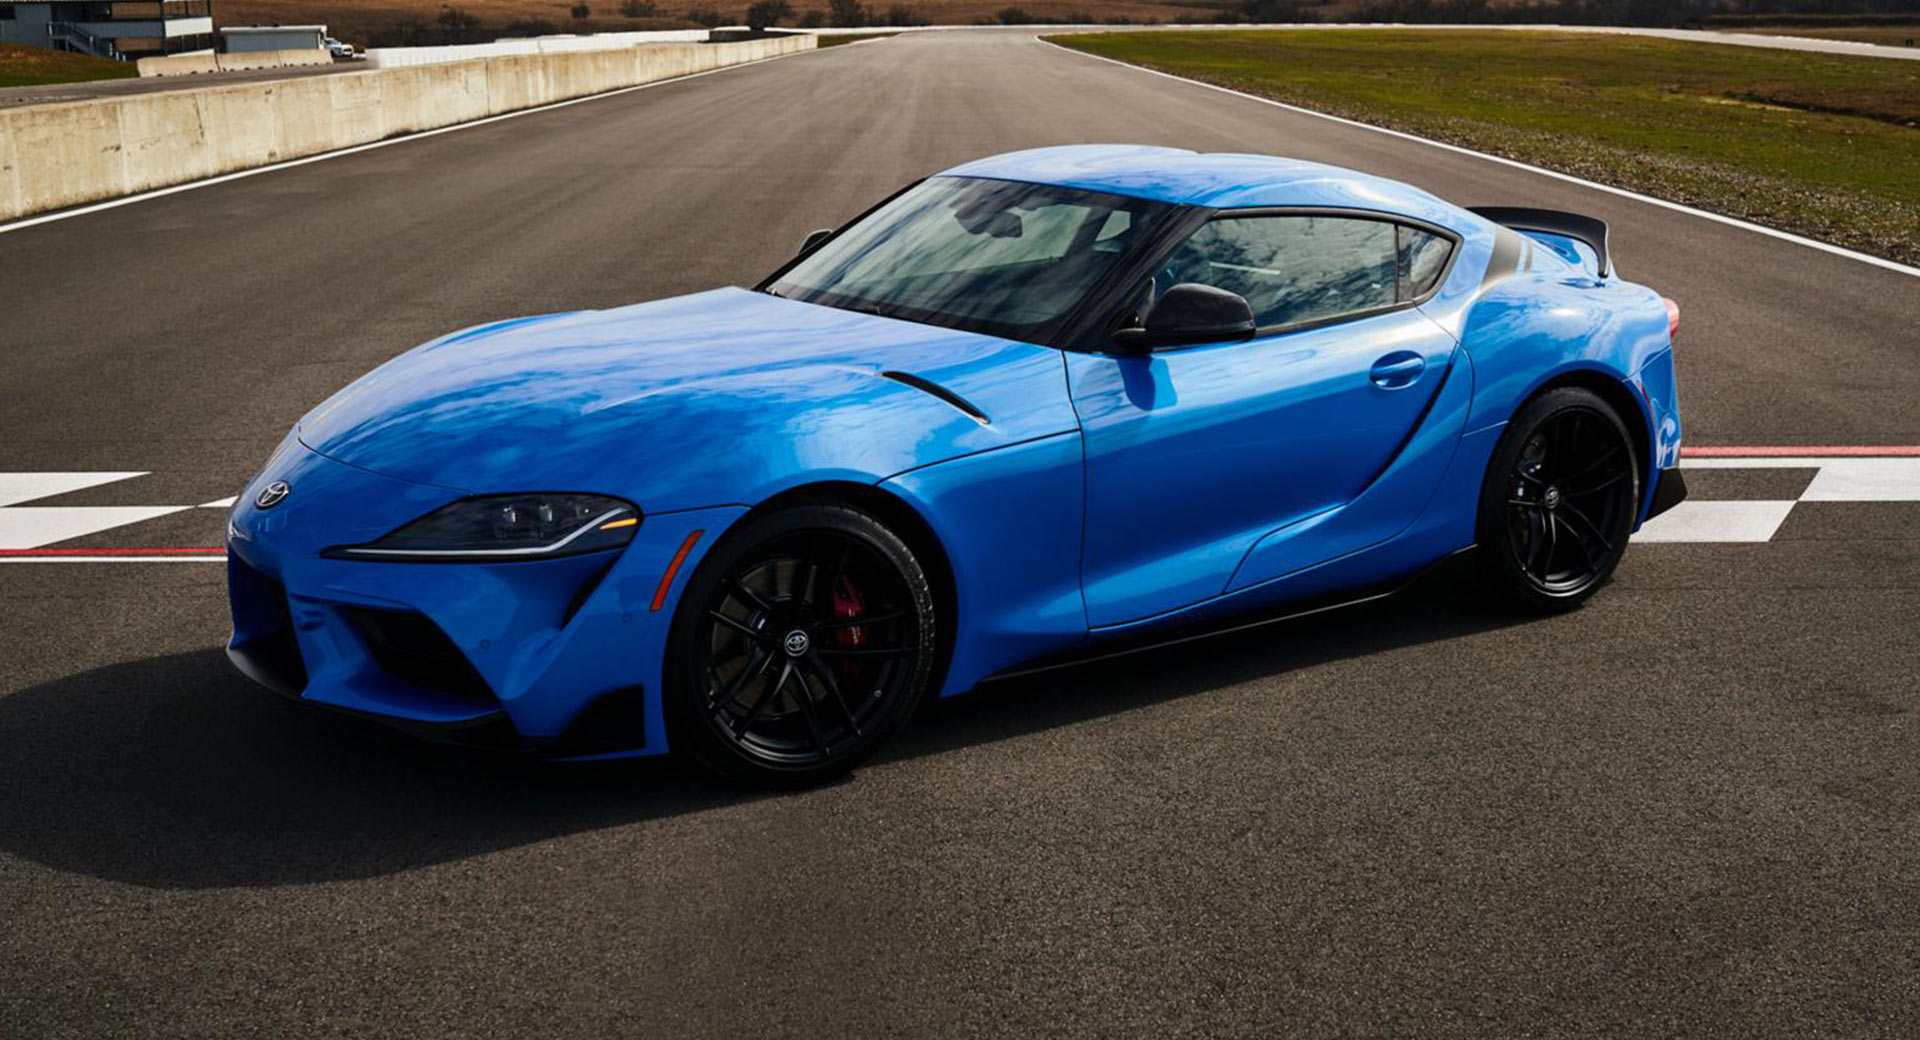 2021 toyota supra trades worse fuel economy ratings for an